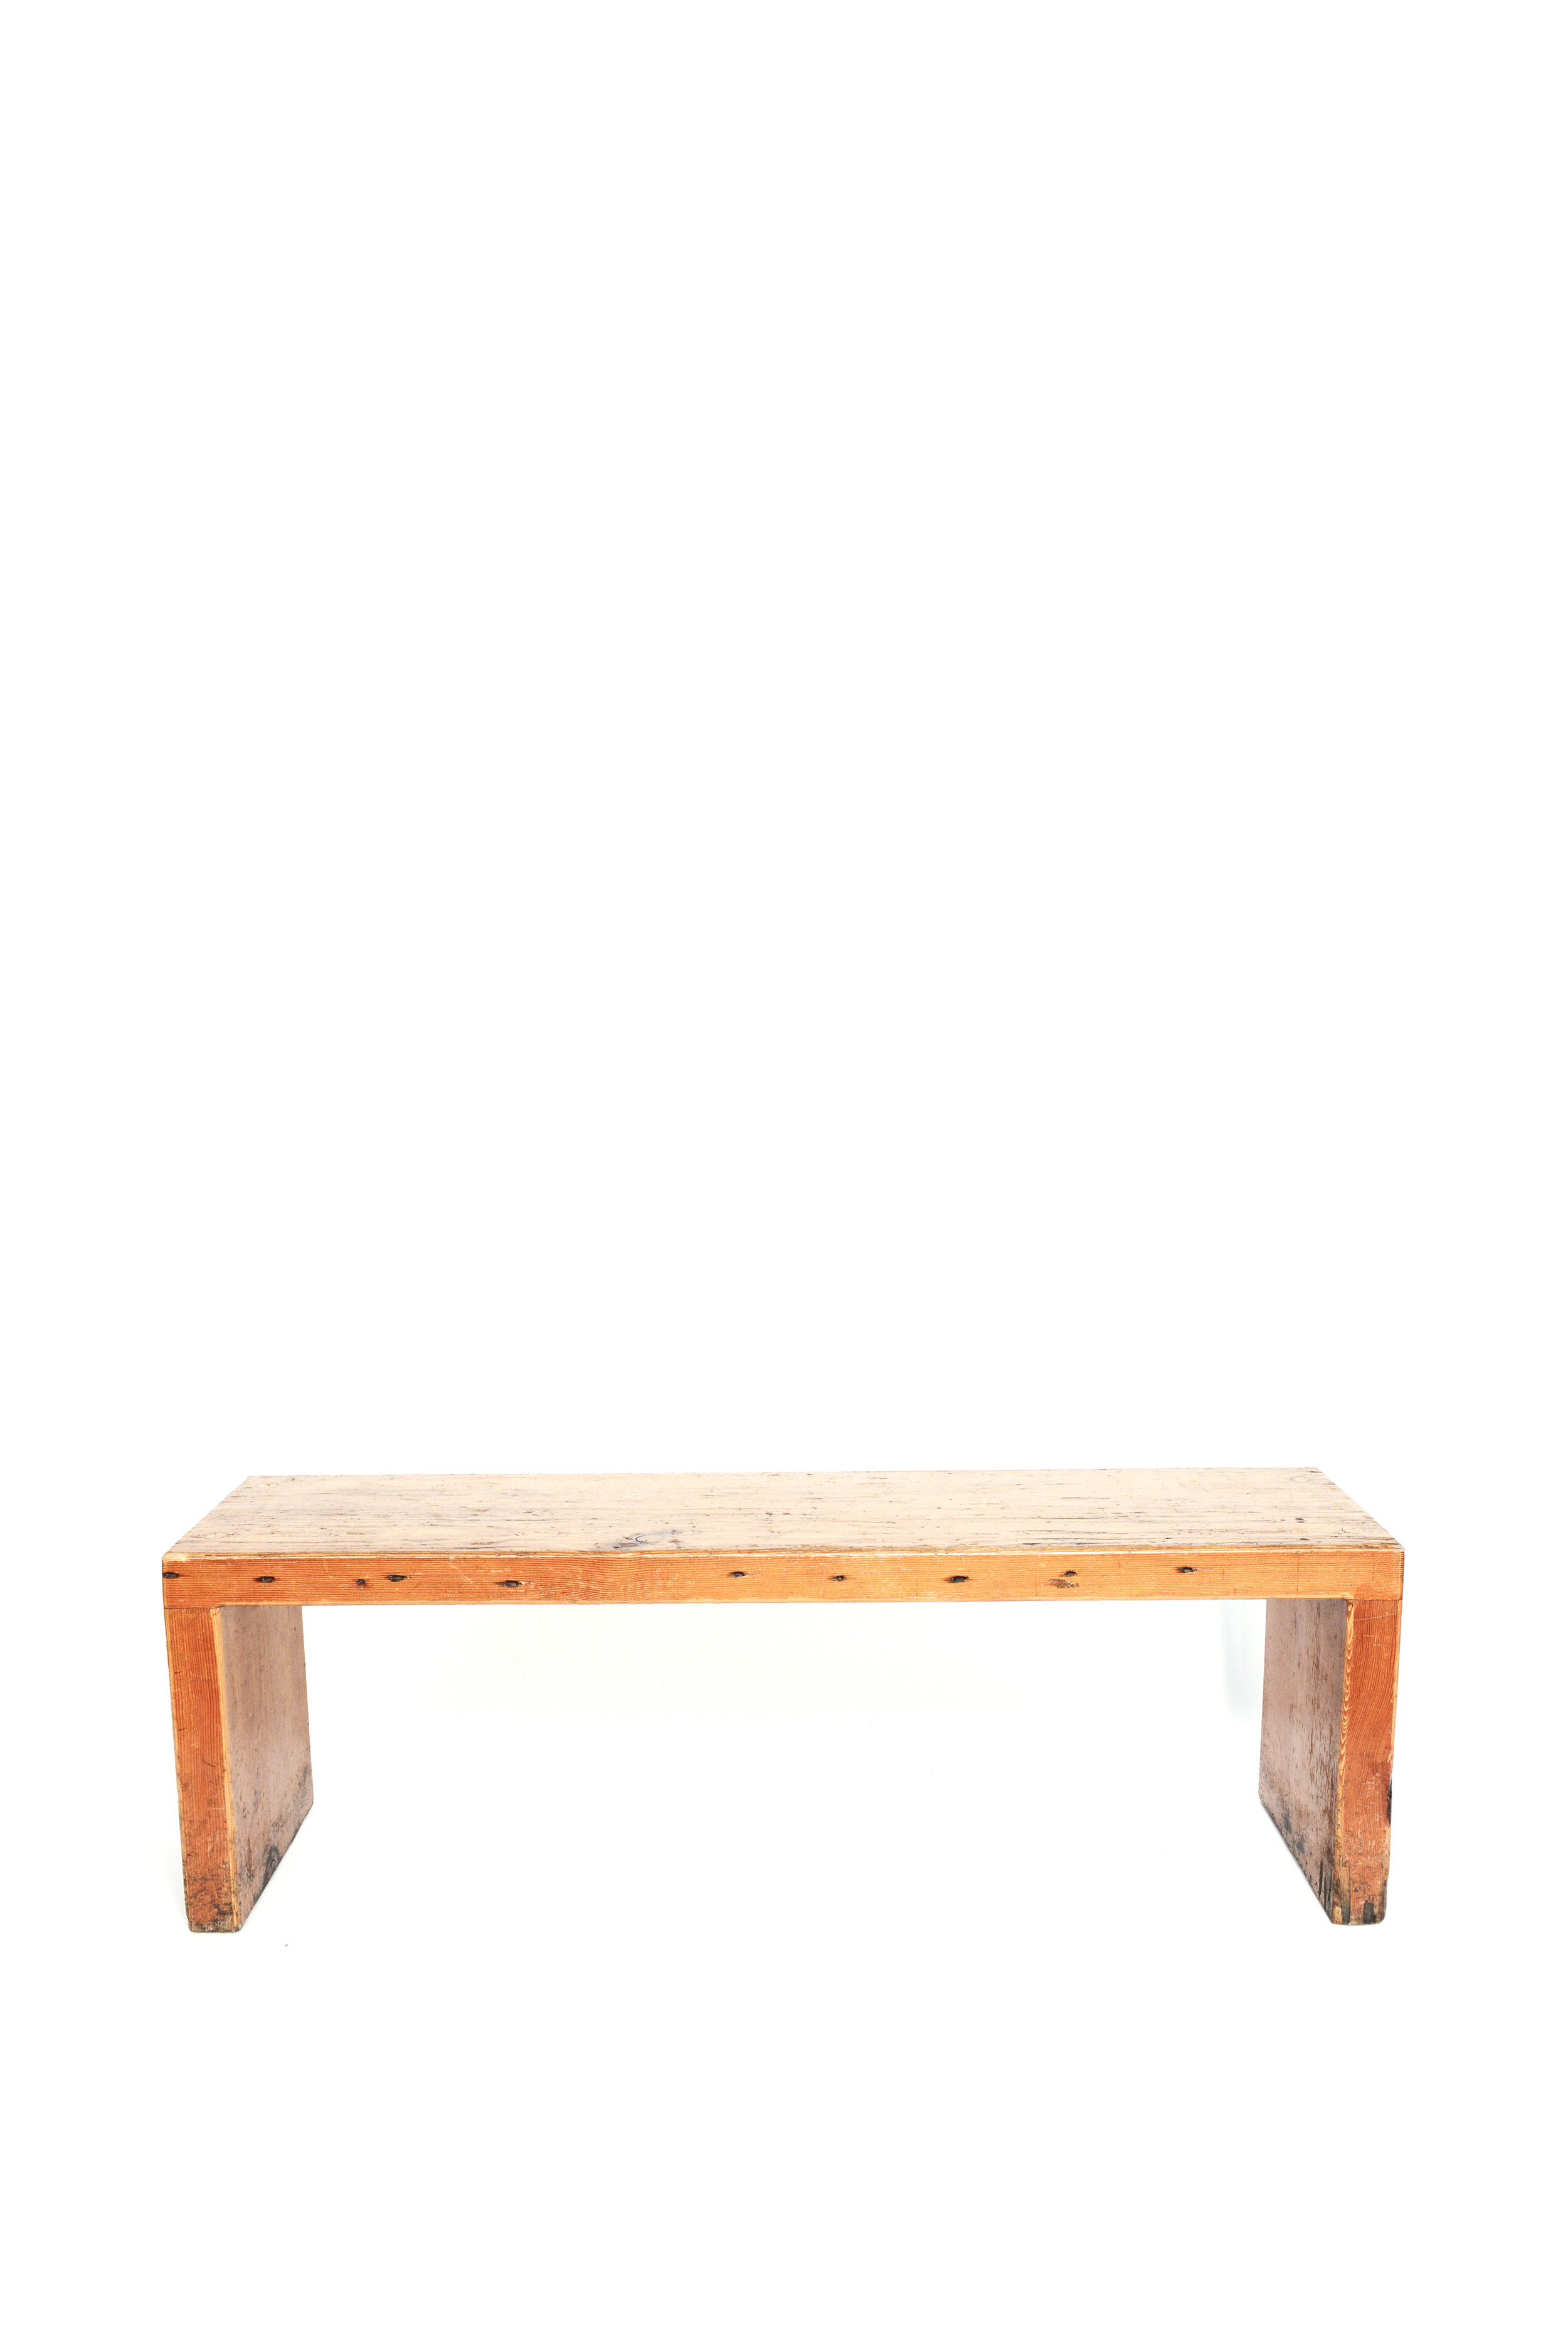 Reclaimed wooden bench qty. 2